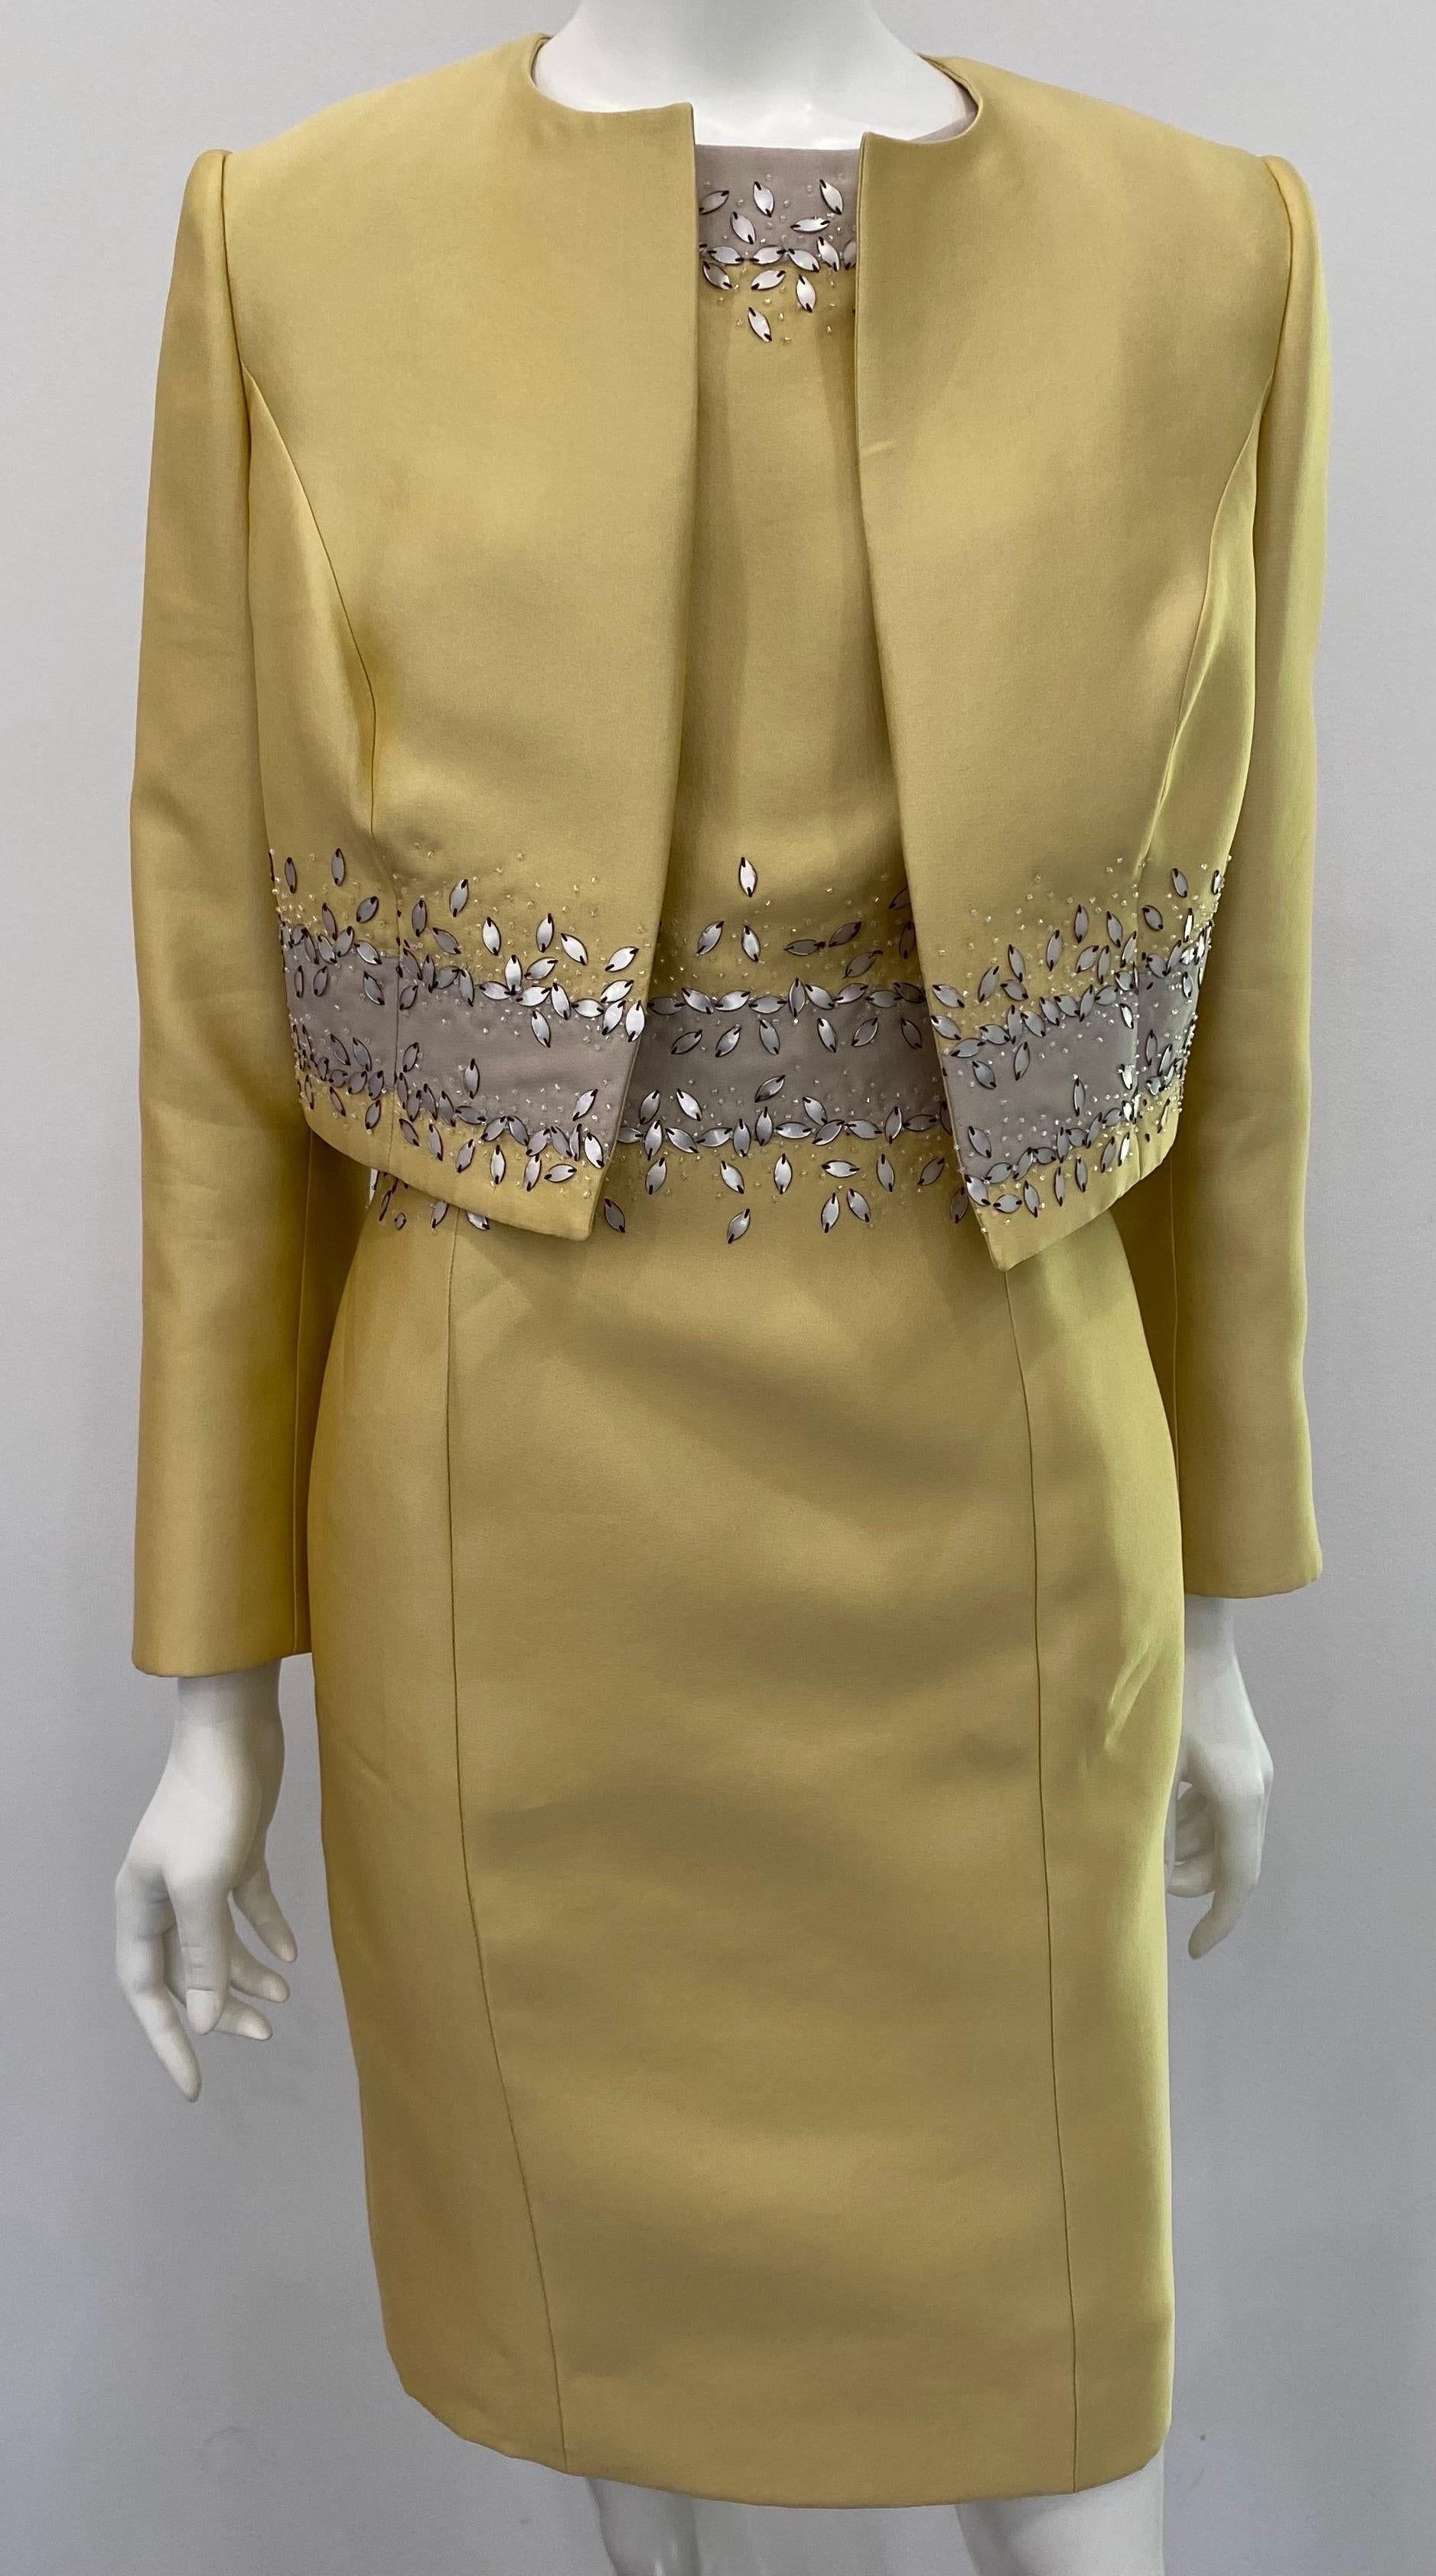 Carolina Herrera Mustard Beaded Silk Sleeveless Dress with Jacket- Sz 10. This very elegant 2 piece ensemble is made of a poly silk blend and is fully lined in silk. The sleeveless sheath dress has a grey trim throughout the neckline, armhole and